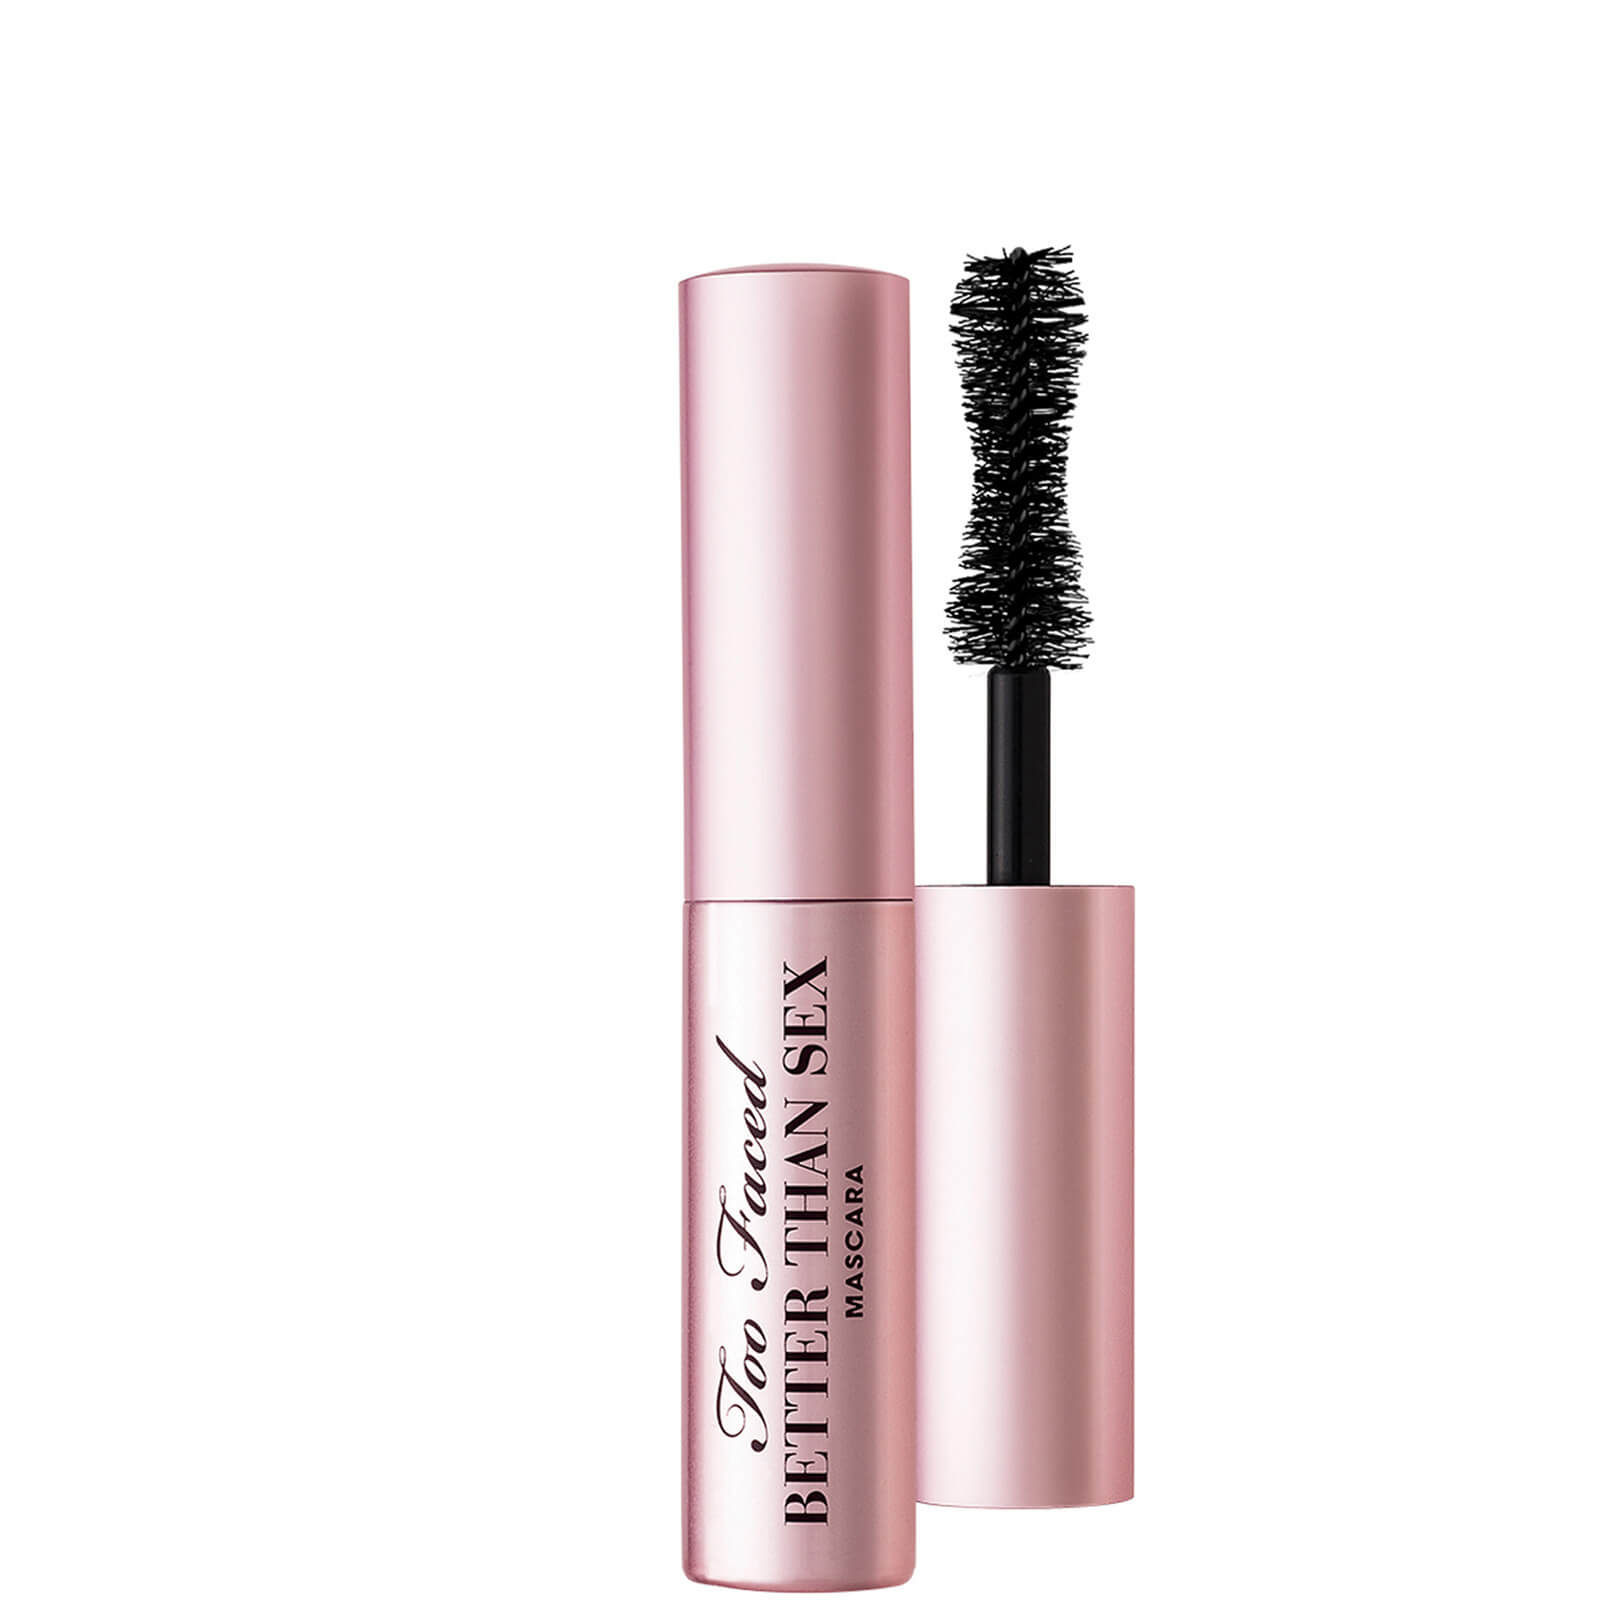 Too Faced Better Than Sex Doll-Size Mascara - Black 4.8g